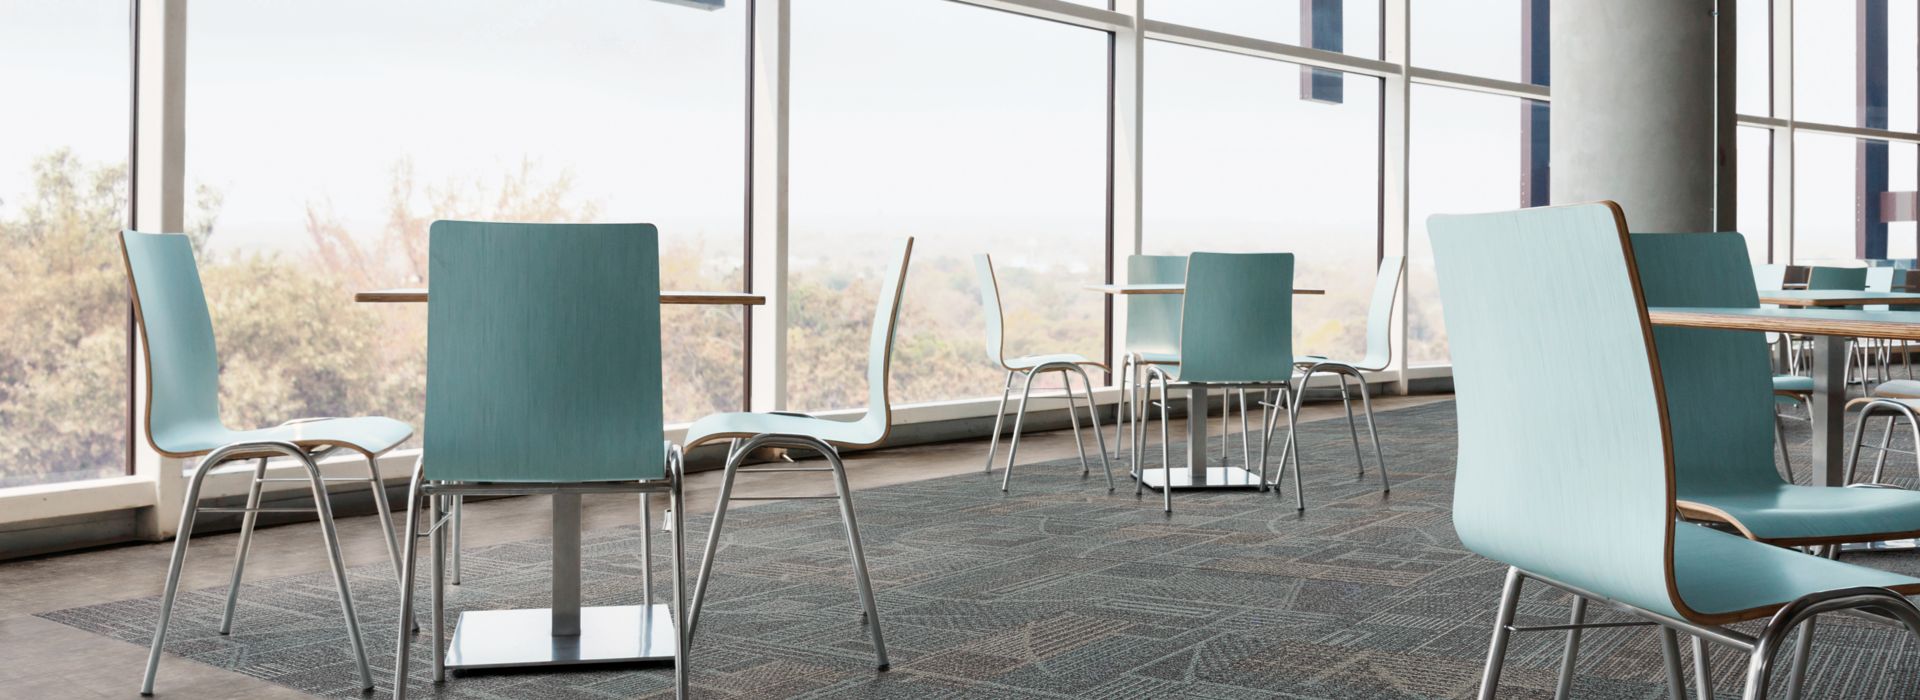 Interface Layout carpet tile and Textured Stones LVT in cafe area with teal colored chairs and natural light image number 1